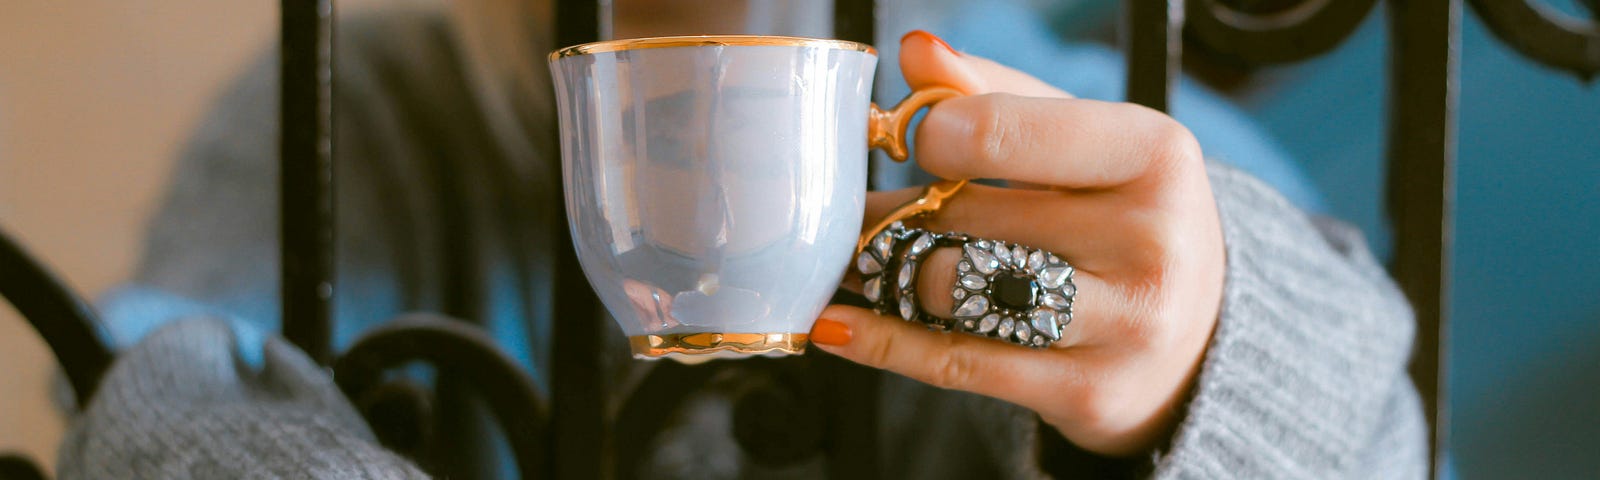 A tea cup and a saucer held by a person wearing rings on her hand